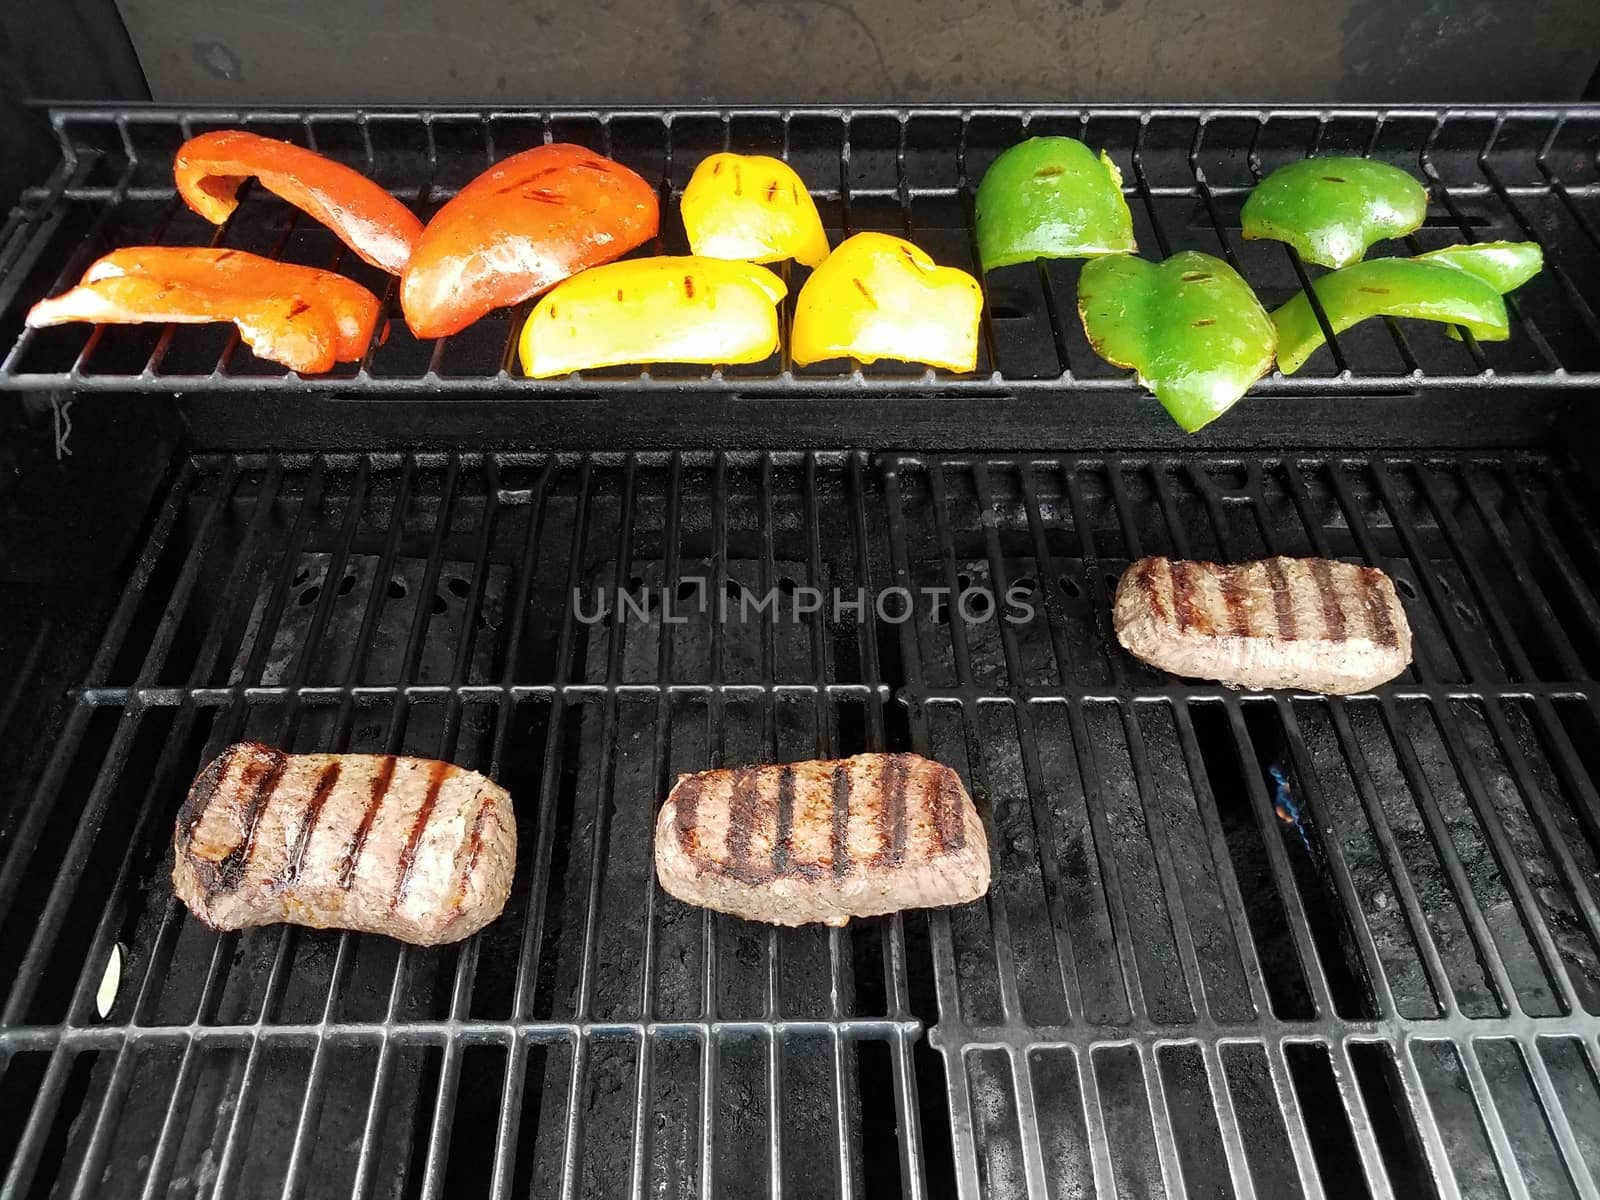 steak and bell peppers on a barbecue grill by stockphotofan1